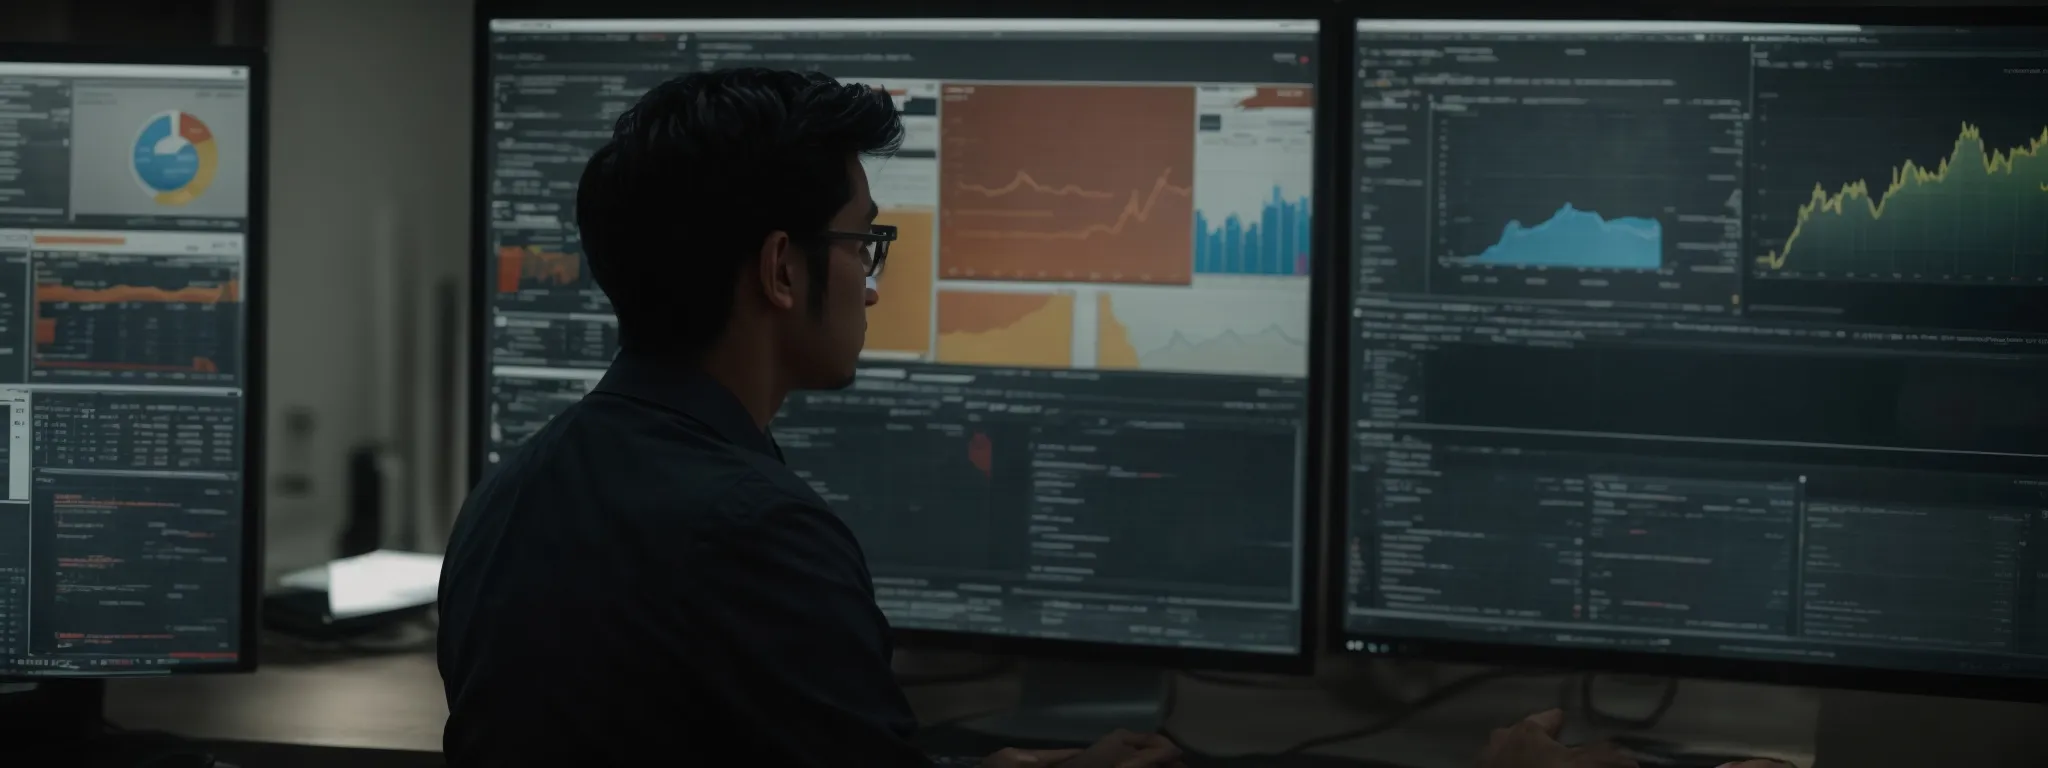 a digital marketer reviews a website's seo performance on a computer screen with various analytics and graphs displayed.